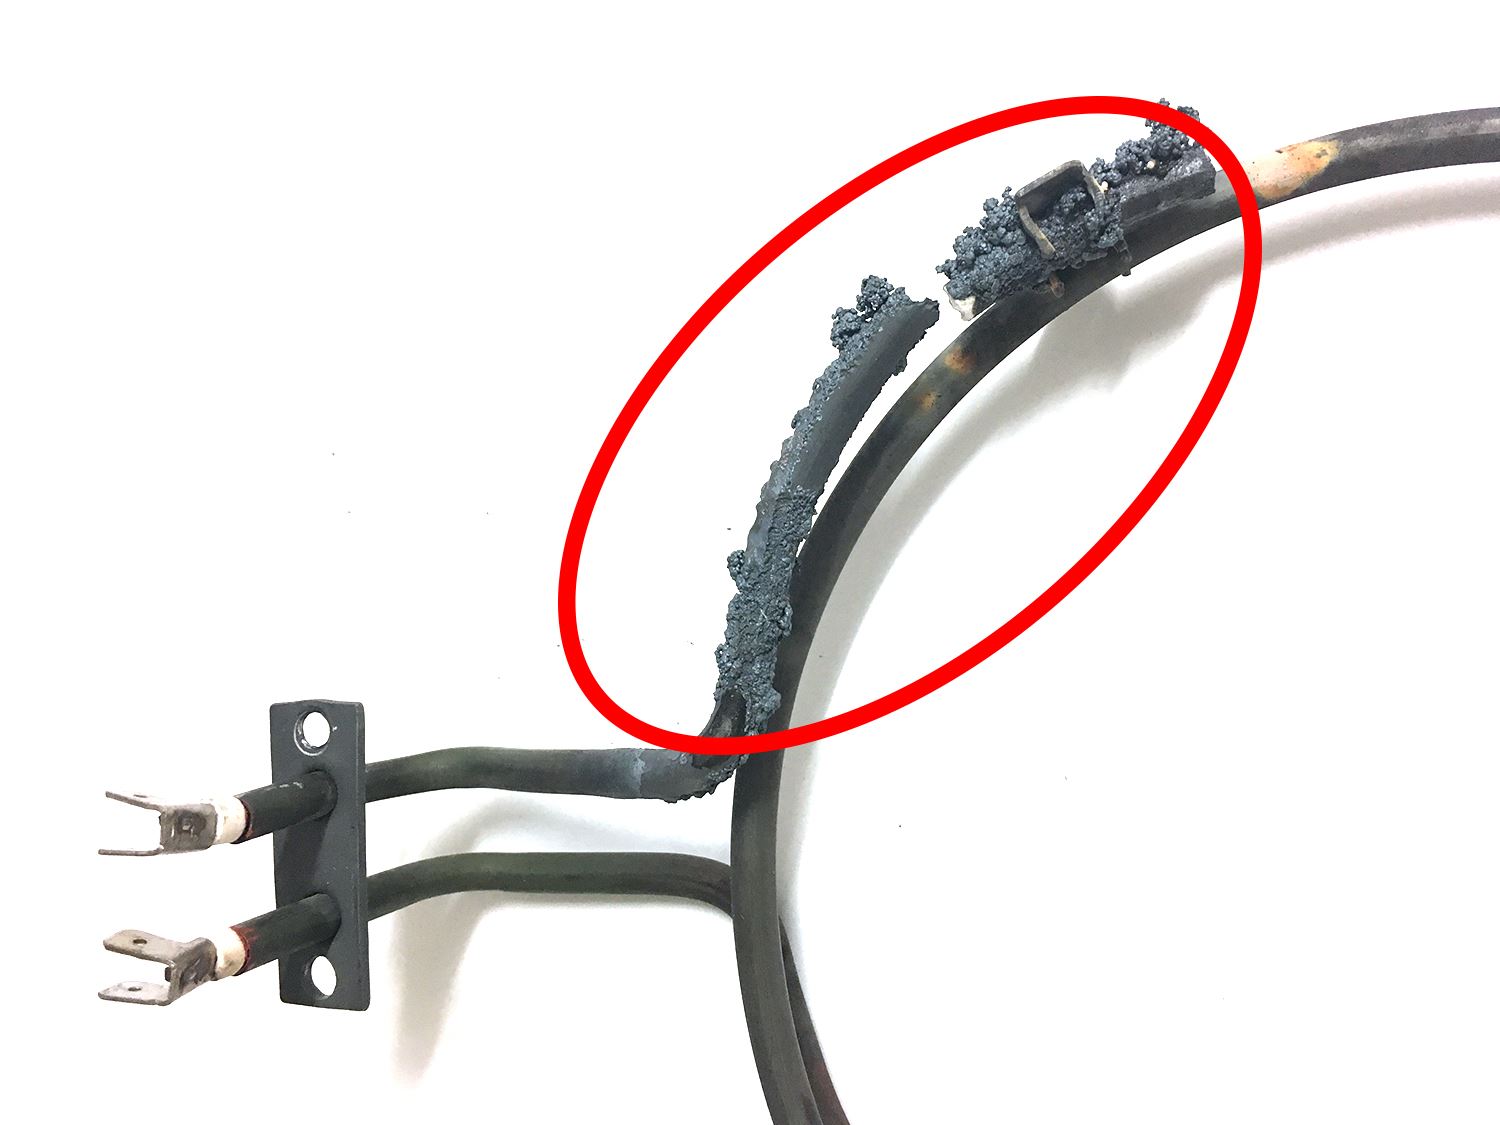 Faulty Fan Oven Element - Obvious Burning